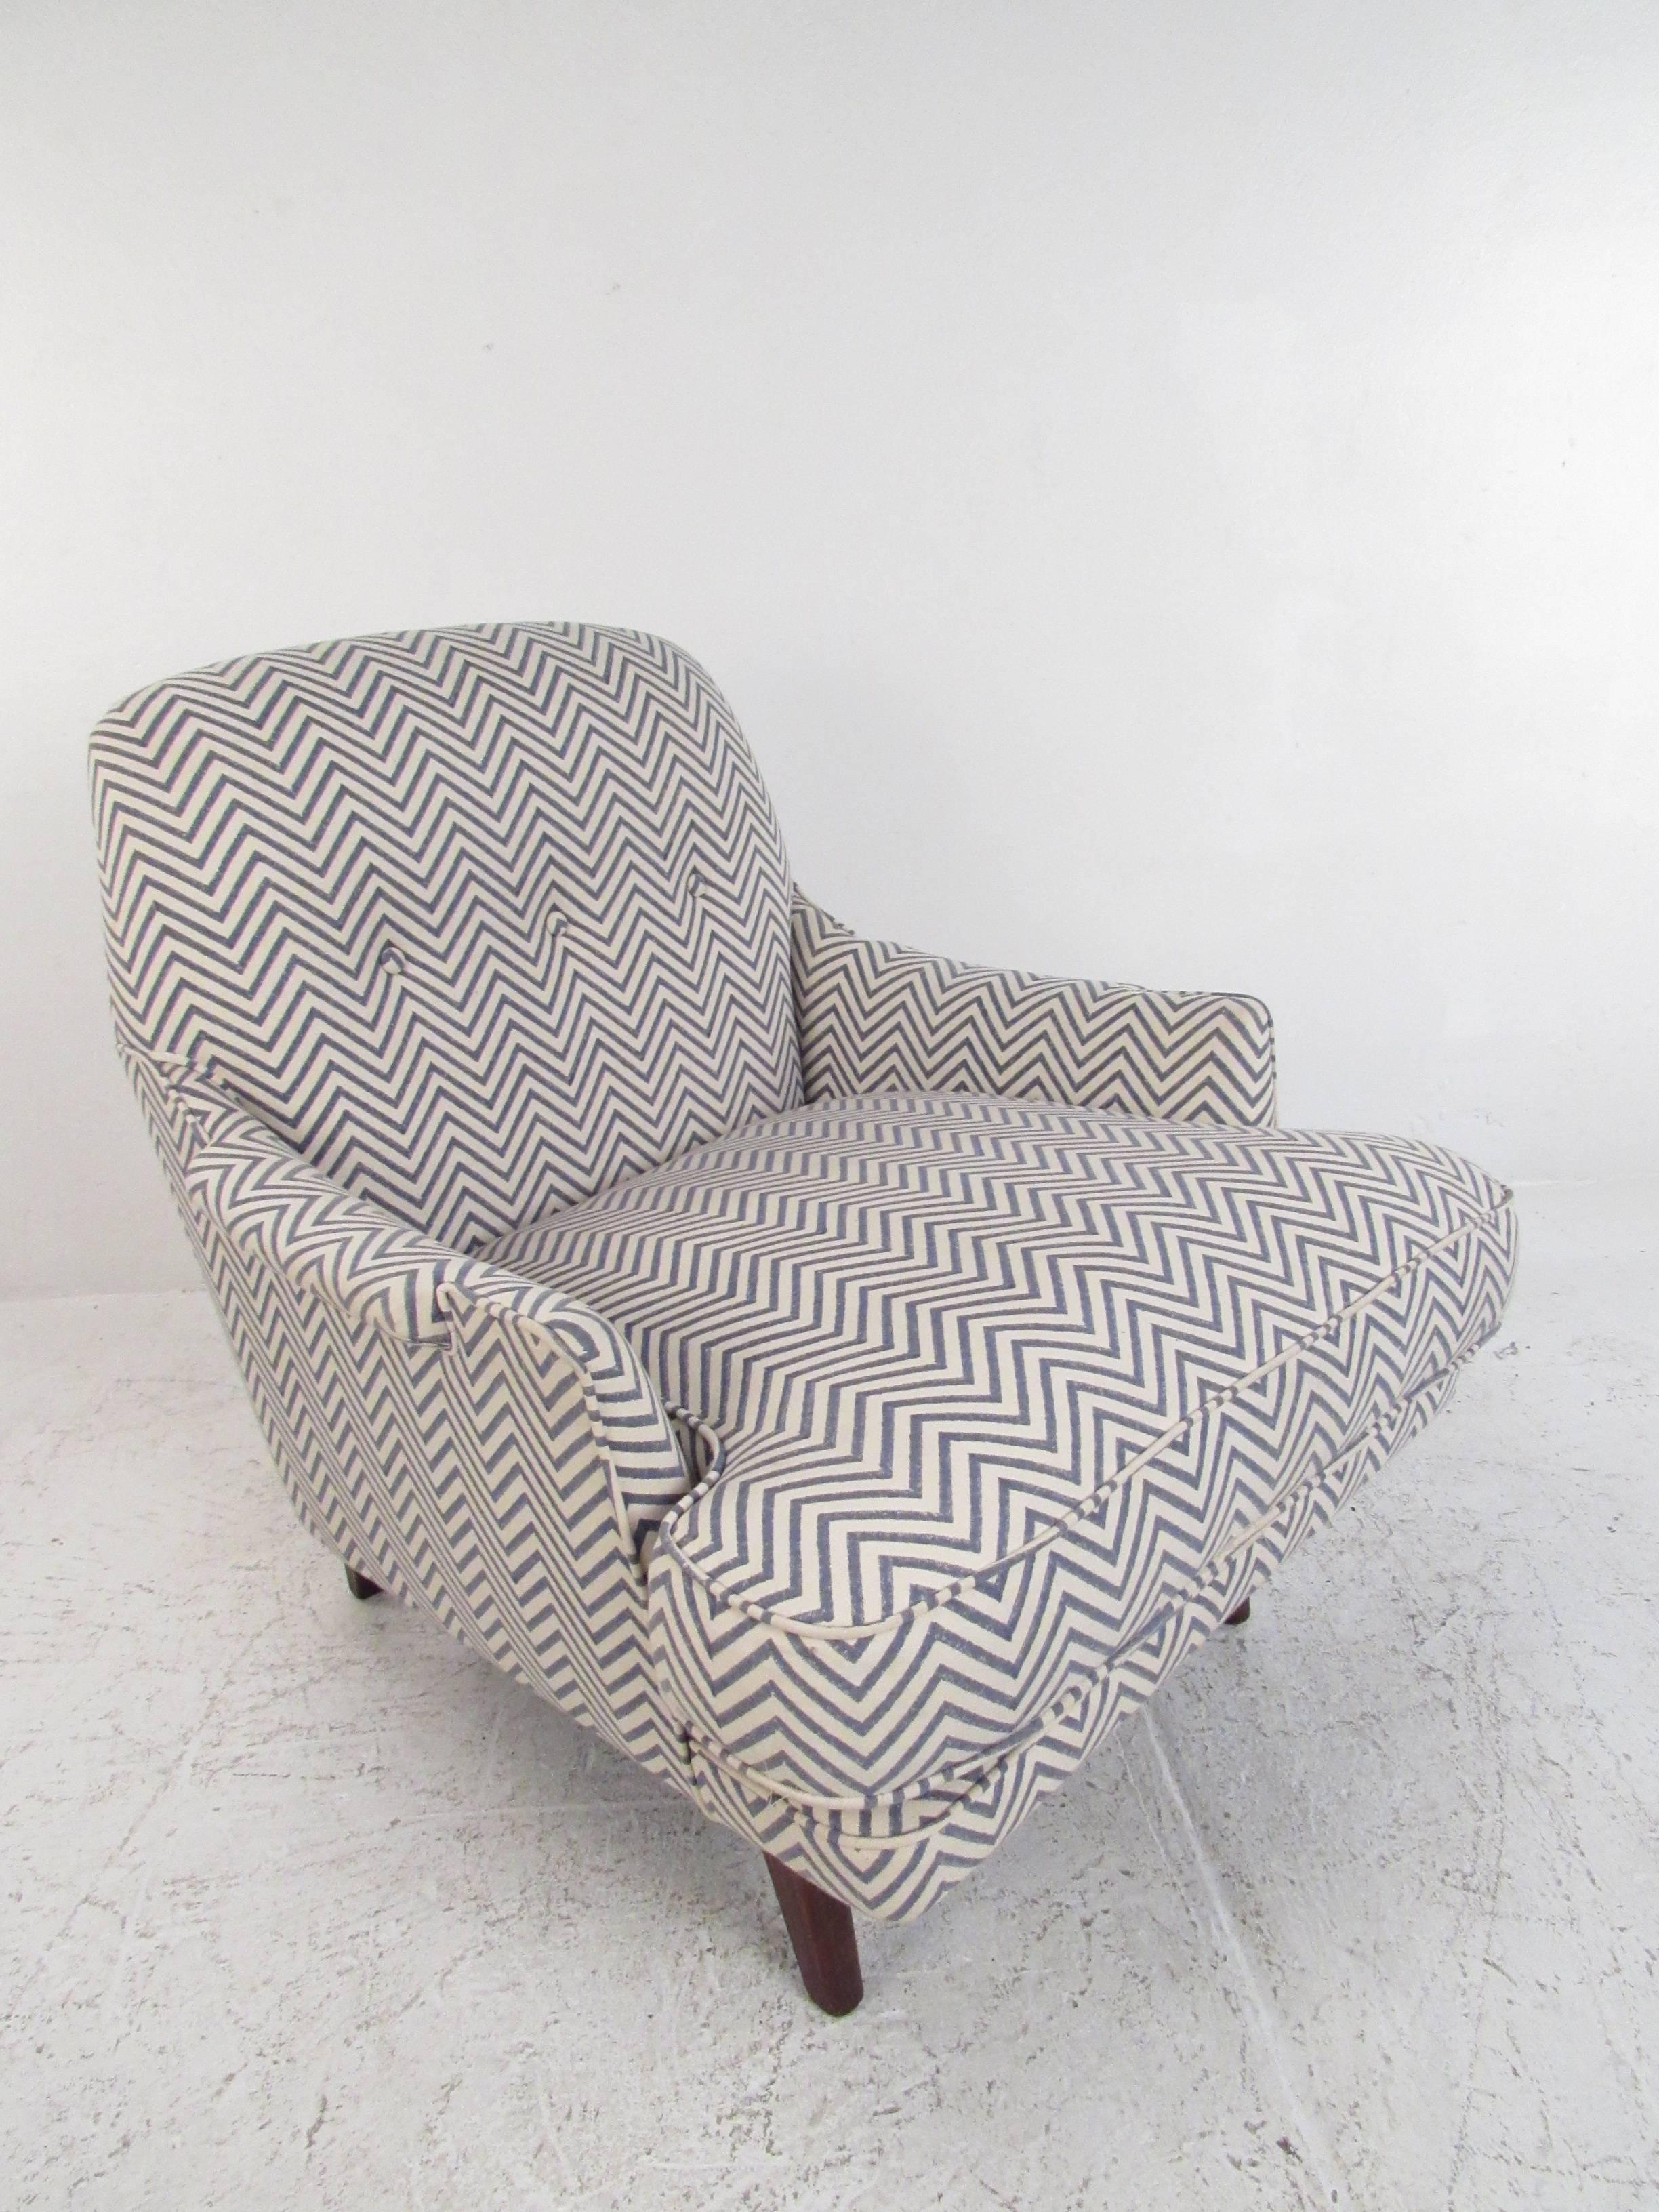 This uniquely shaped vintage lounge chair features rounded seat back, tufted upholstery, and a matching vintage ottoman. Unique padded armrests add to the stylish charm of this vintage Roger Sprunger chair, making it perfect for home or lounge use.